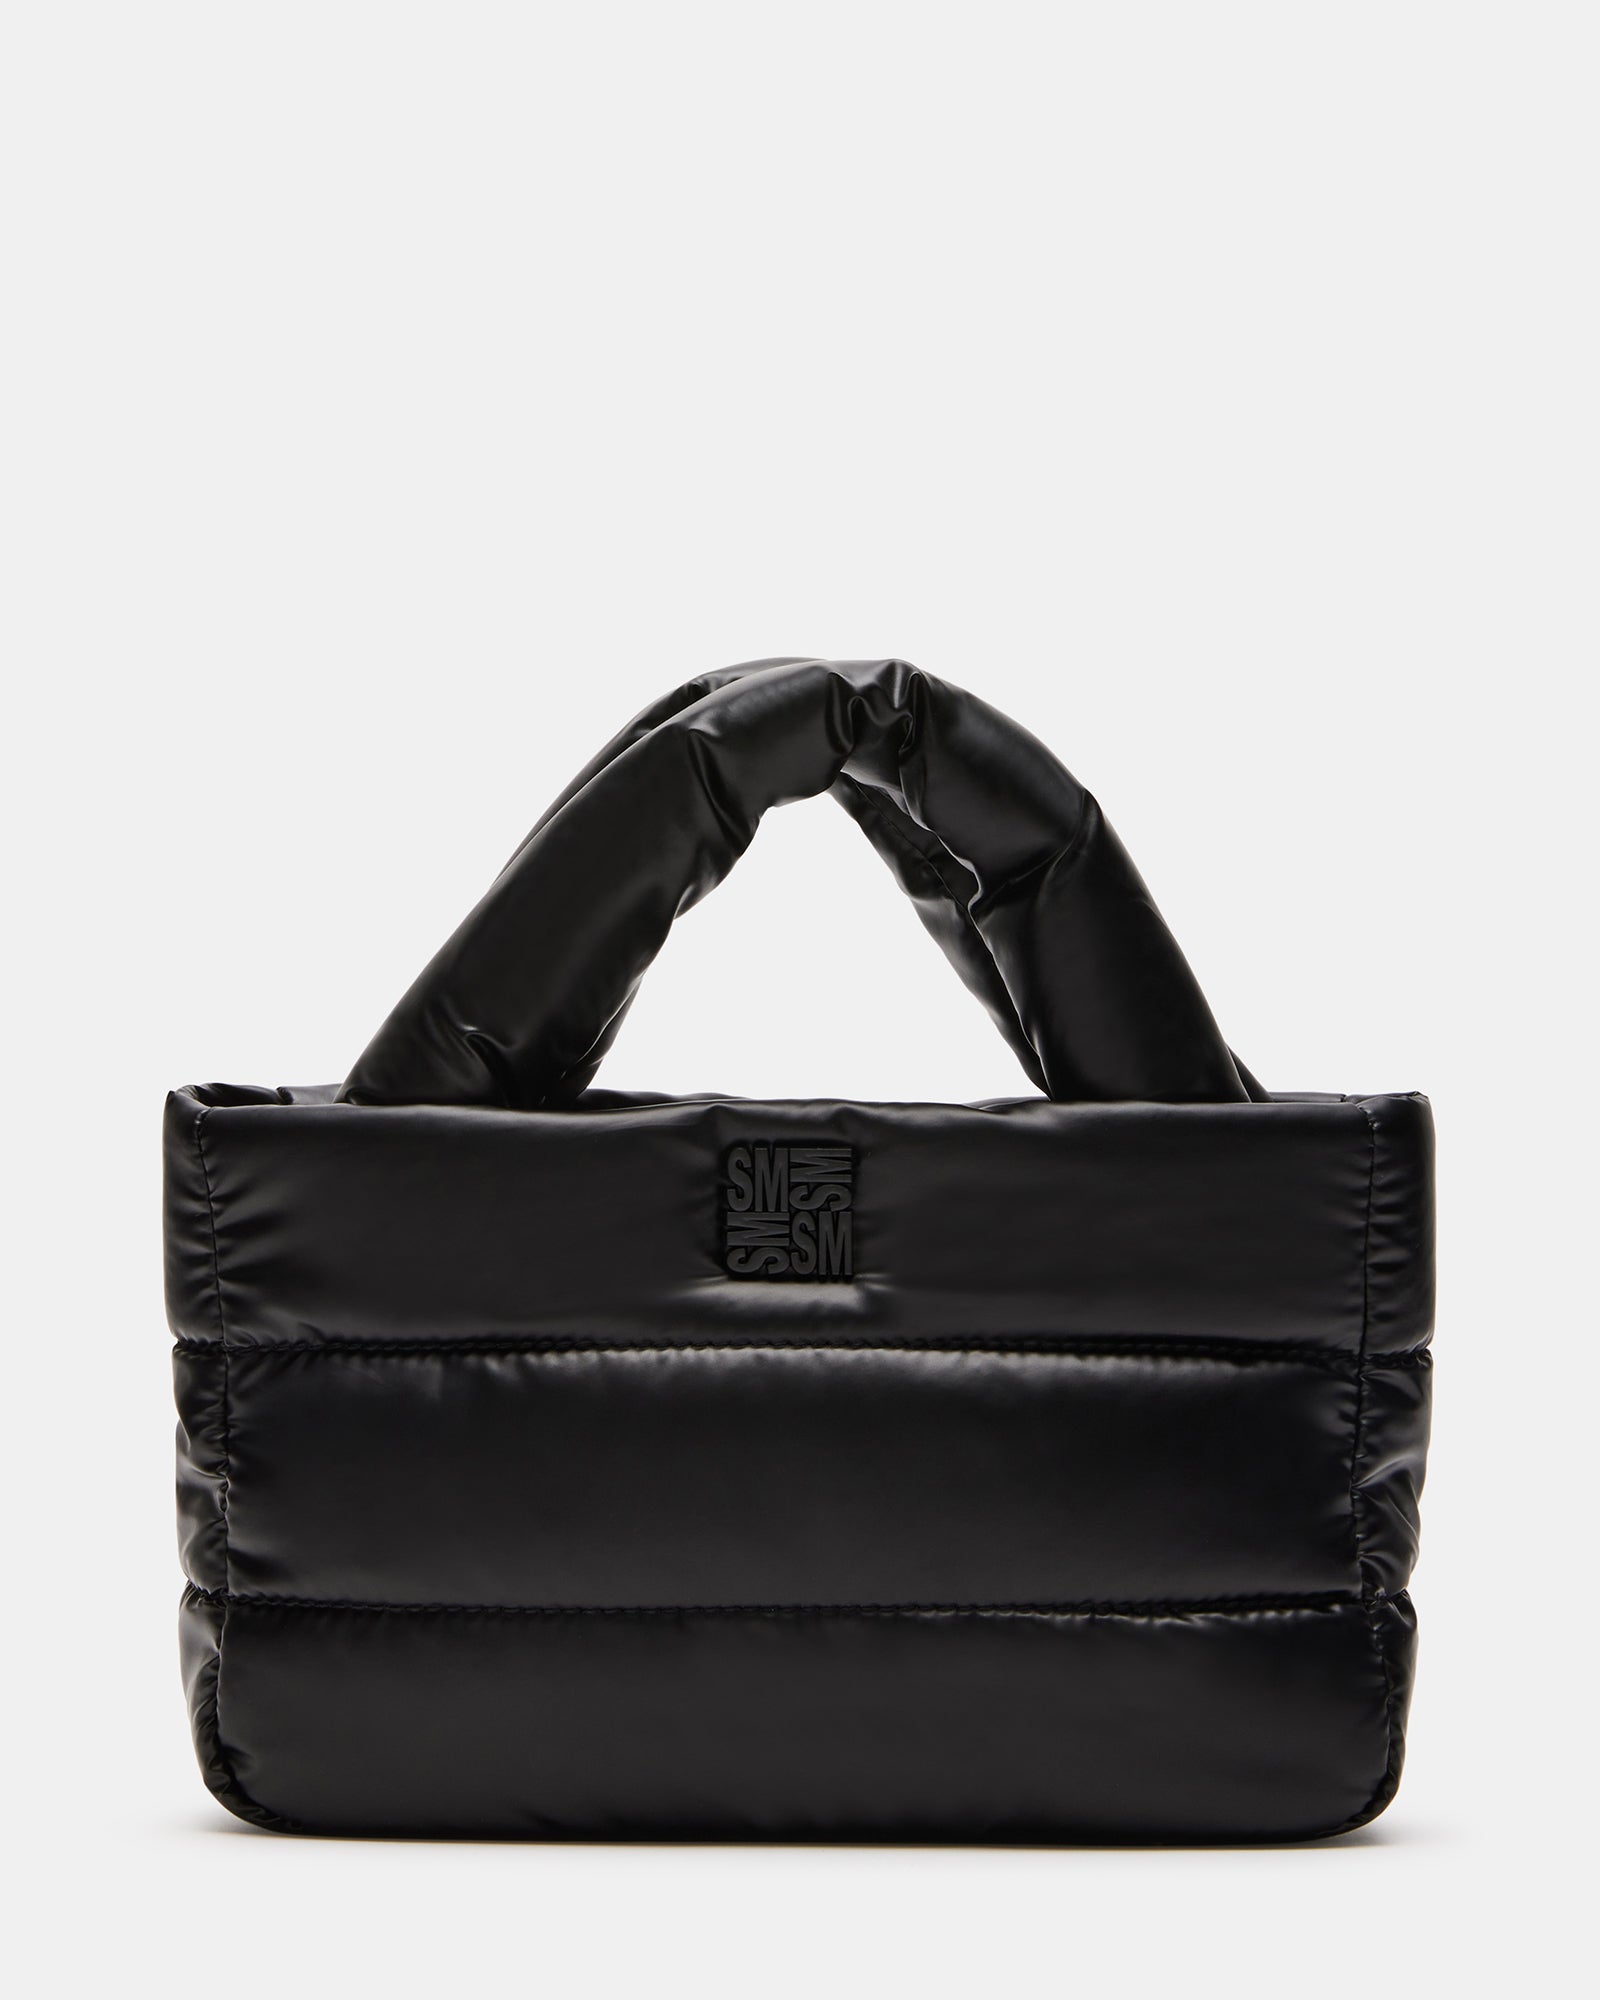 CHANEL Bags & Handbags for Women for sale, Shop with Afterpay